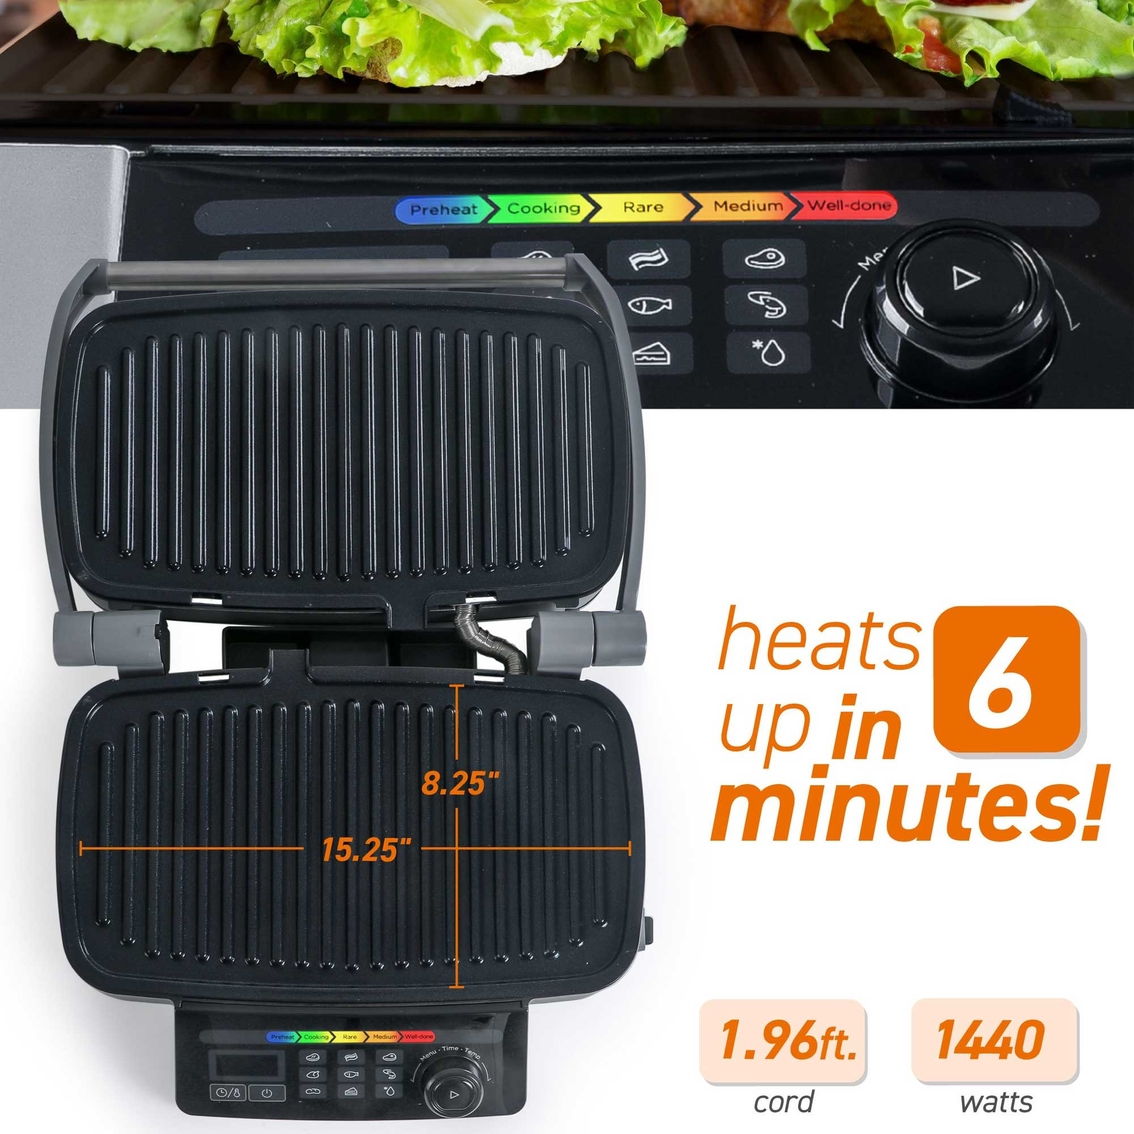 Commercial Chef 9 in 1 Contact Grill - Image 4 of 7